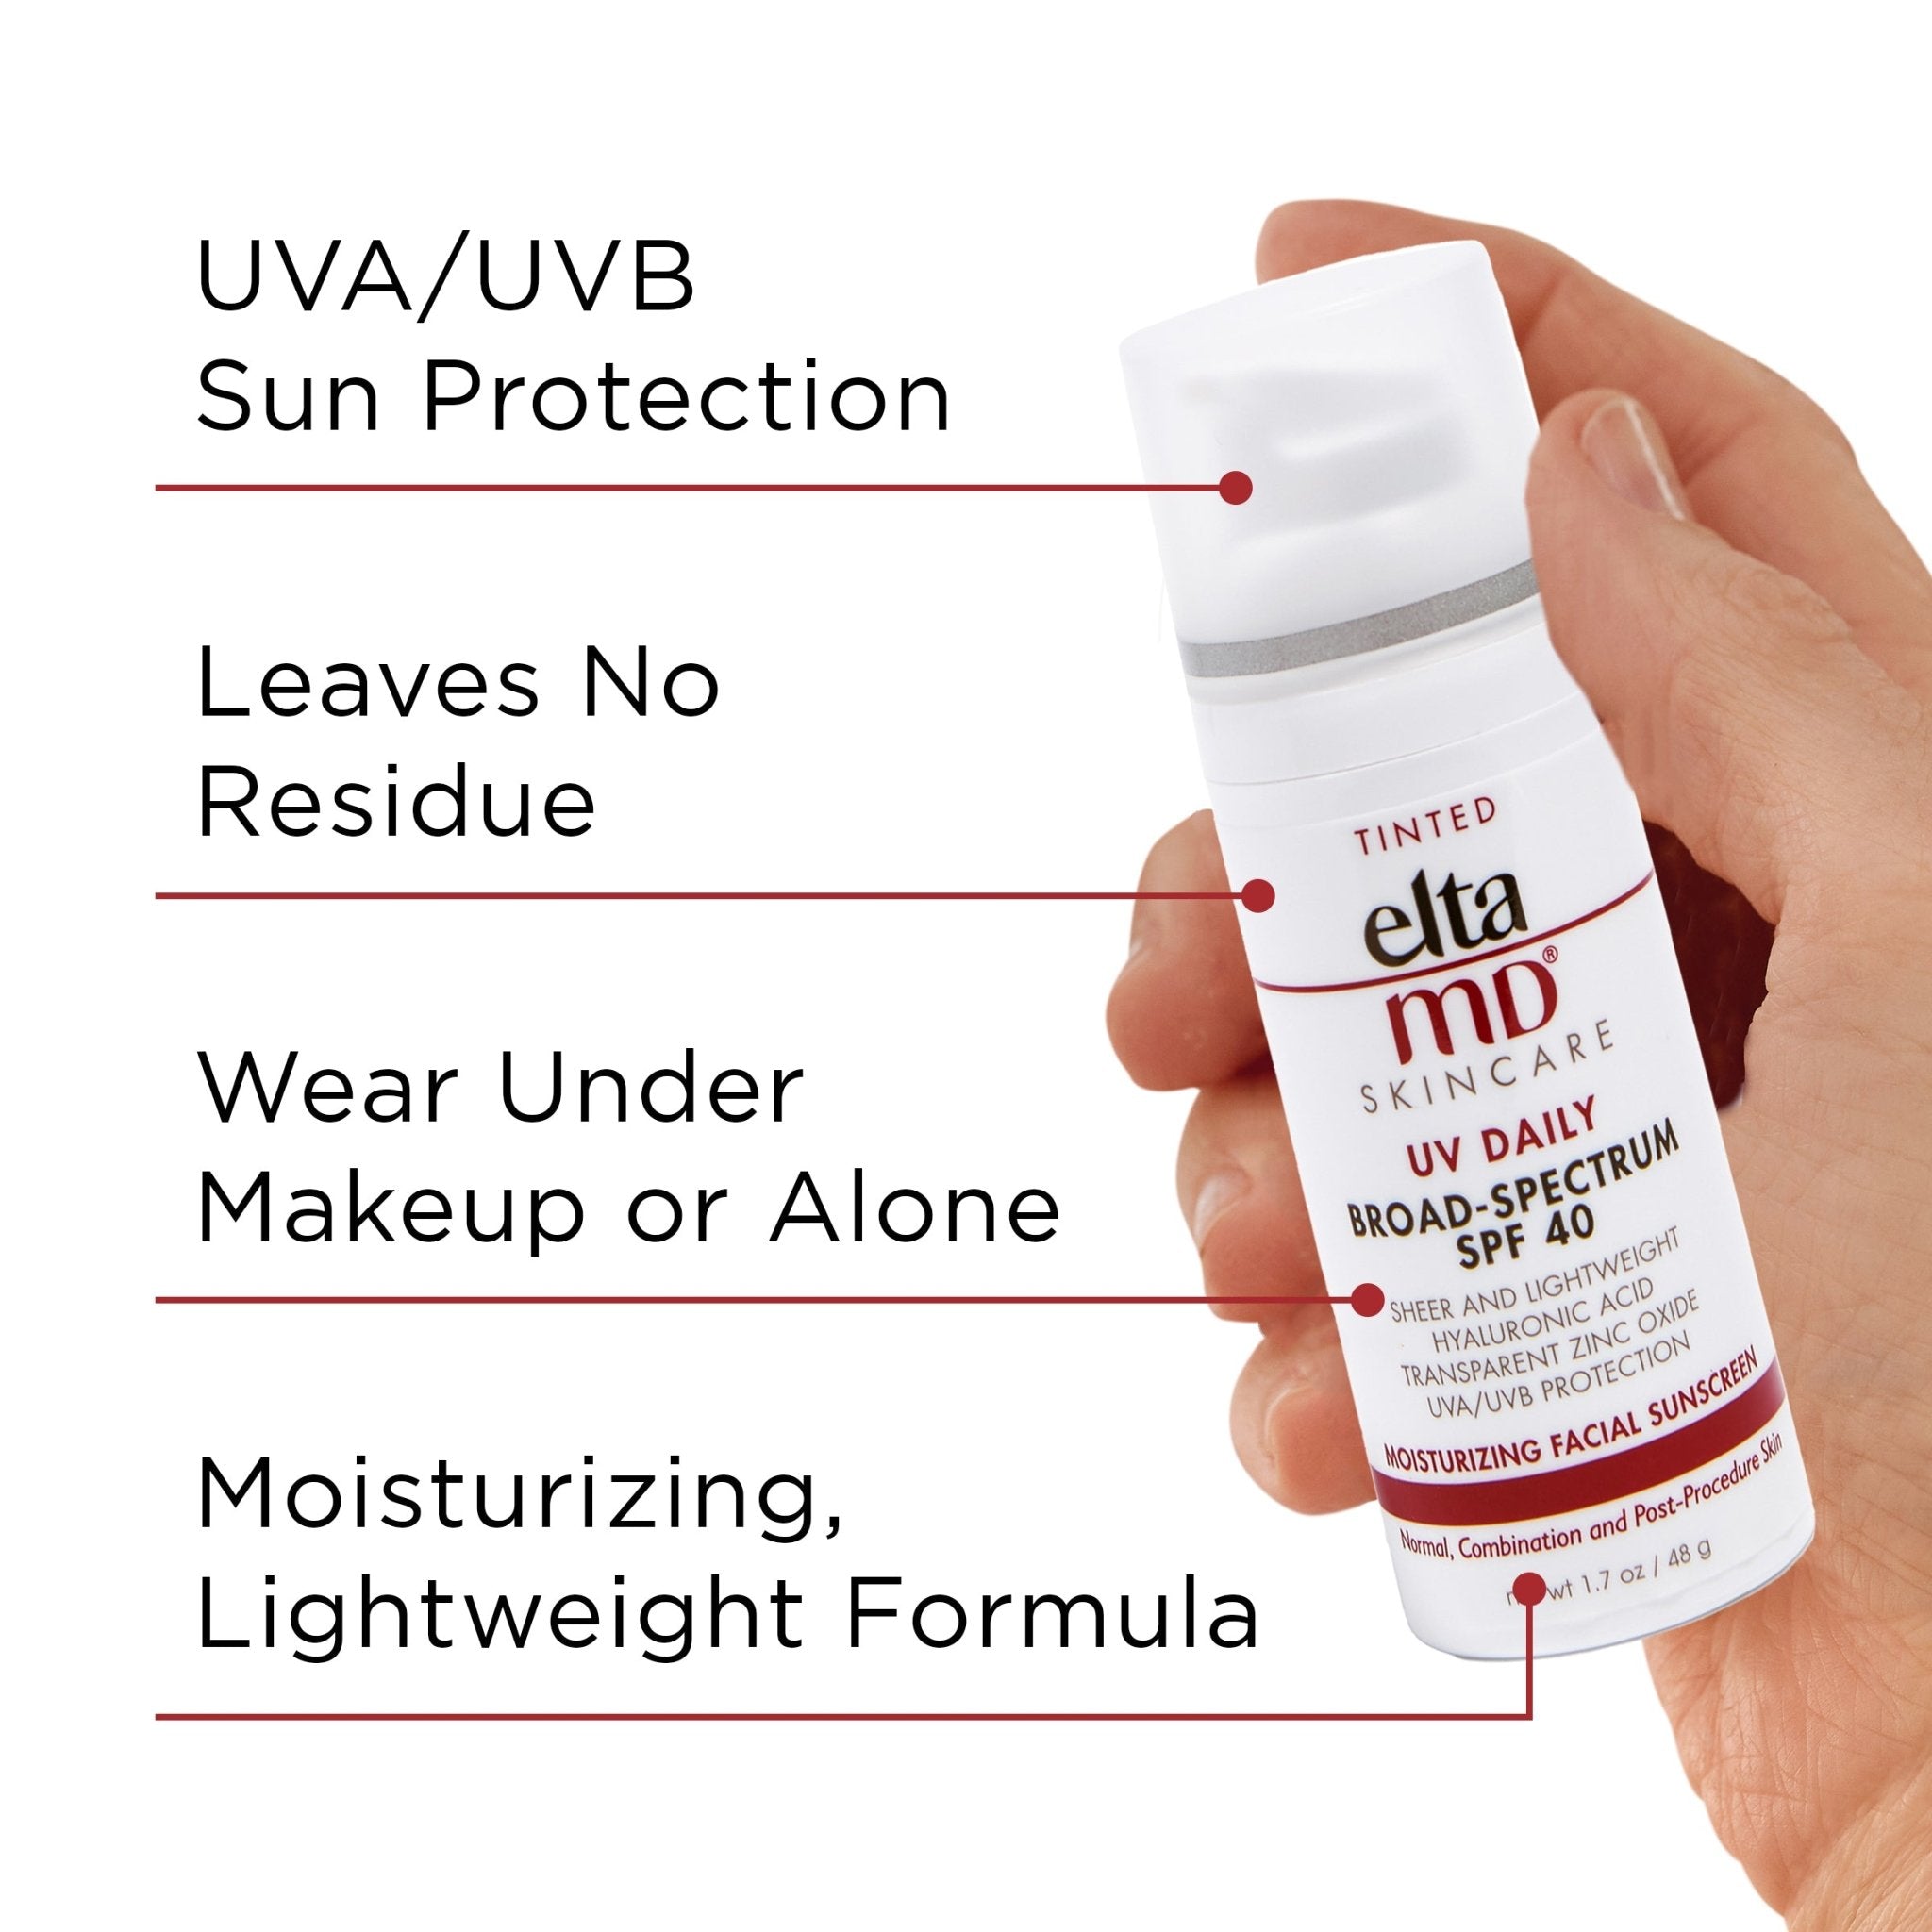 UV Daily Broad-Spectrum SPF 40 1.7 oz. - The Look and Co